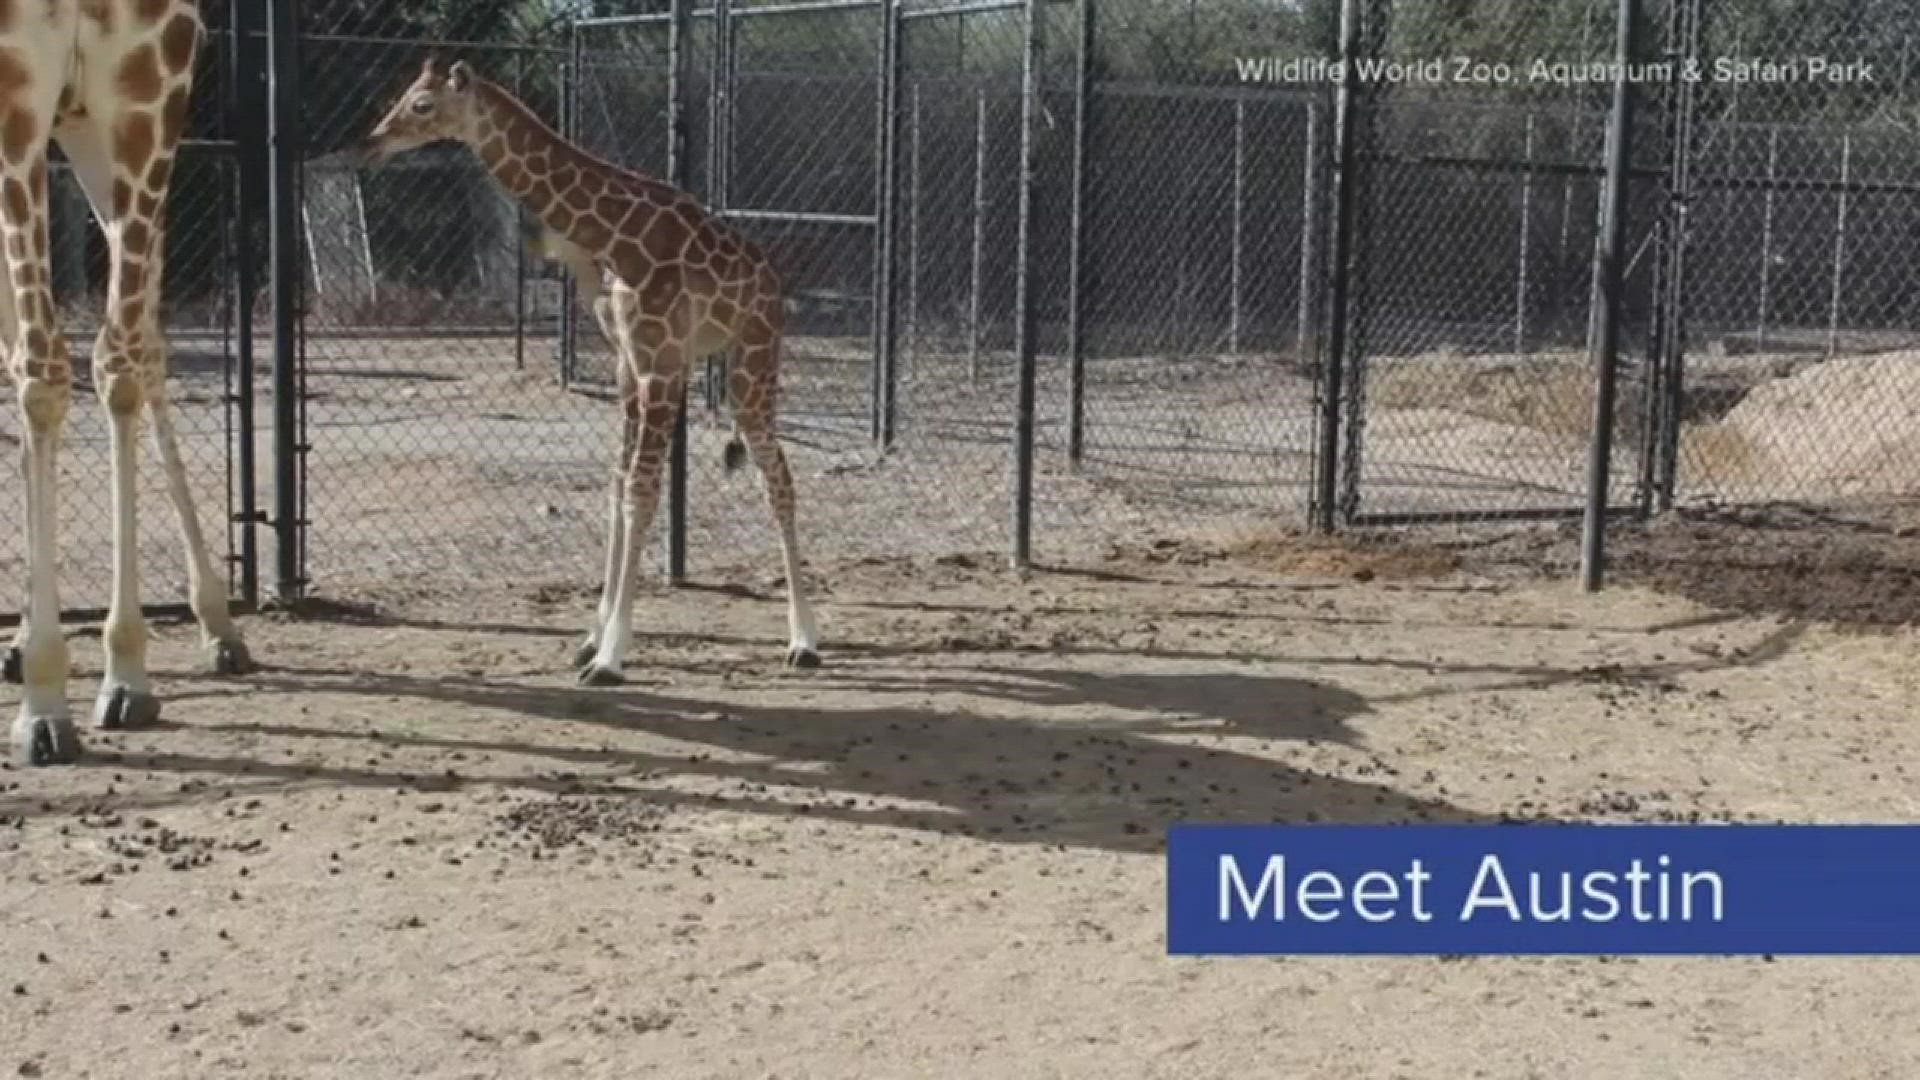 Wildlife World Zoo, Aquarium & Safari Park in the West Valley welcomed the adorable little guy into the world on Feb. 18.